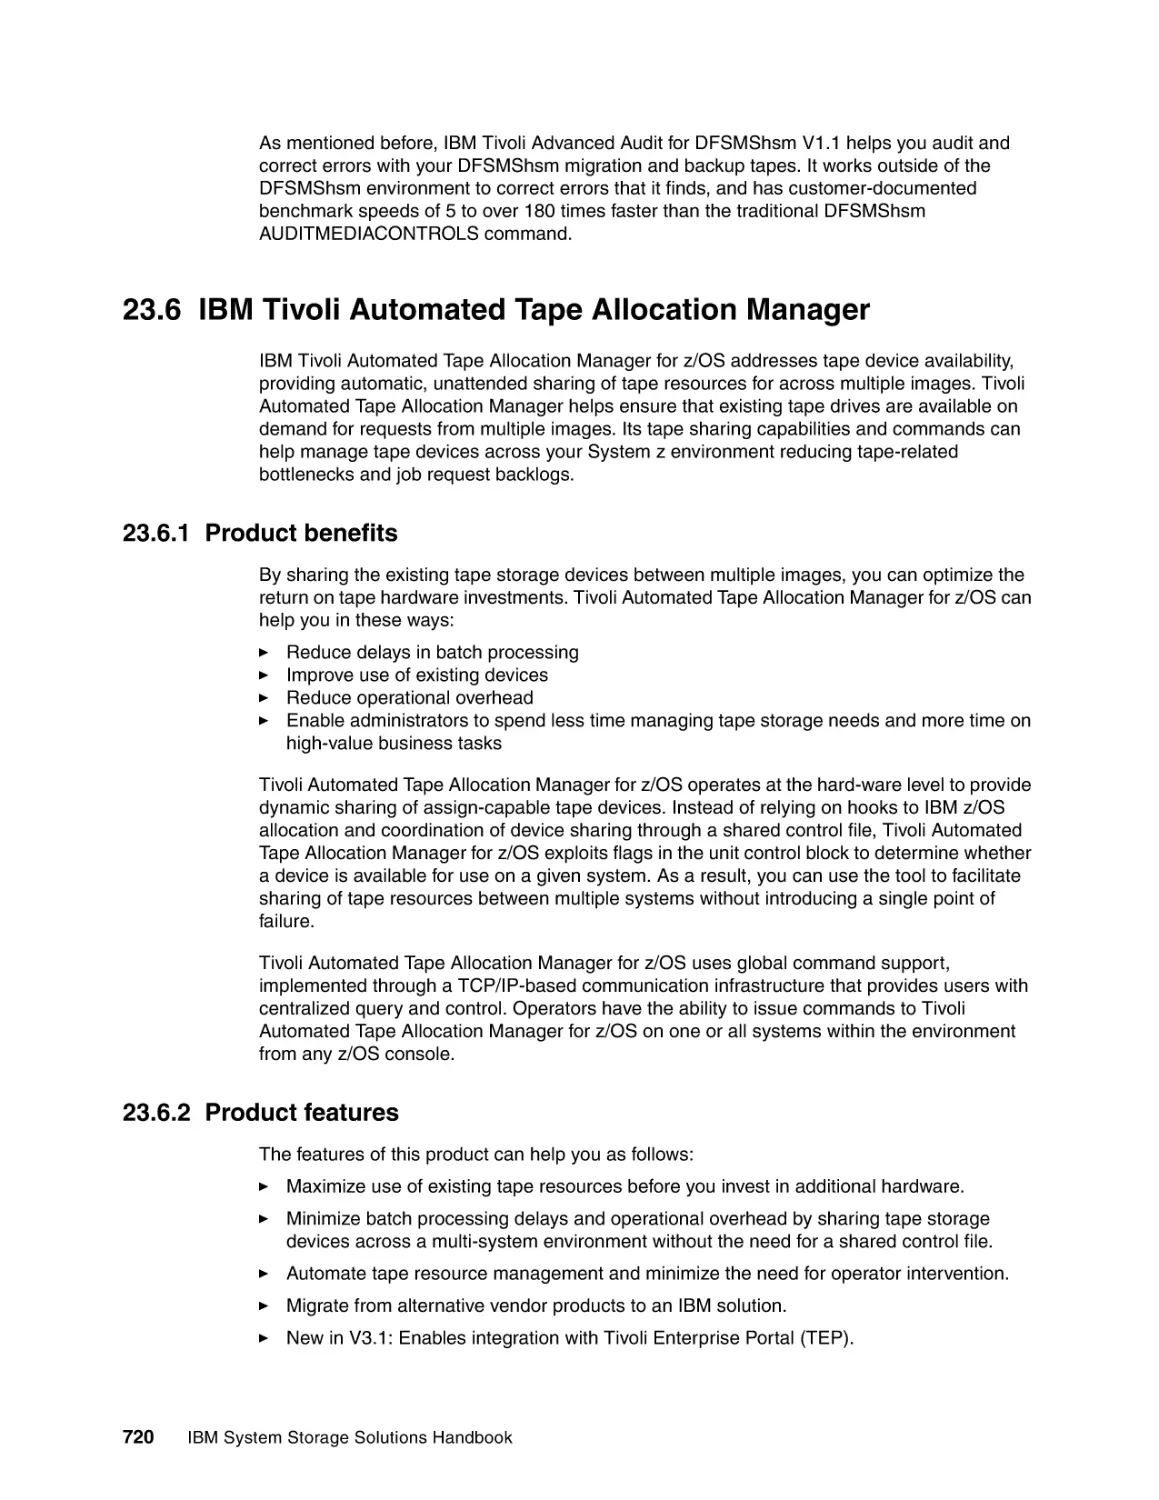 23.6 IBM Tivoli Automated Tape Allocation Manager
23.6.1 Product benefits
23.6.2 Product features